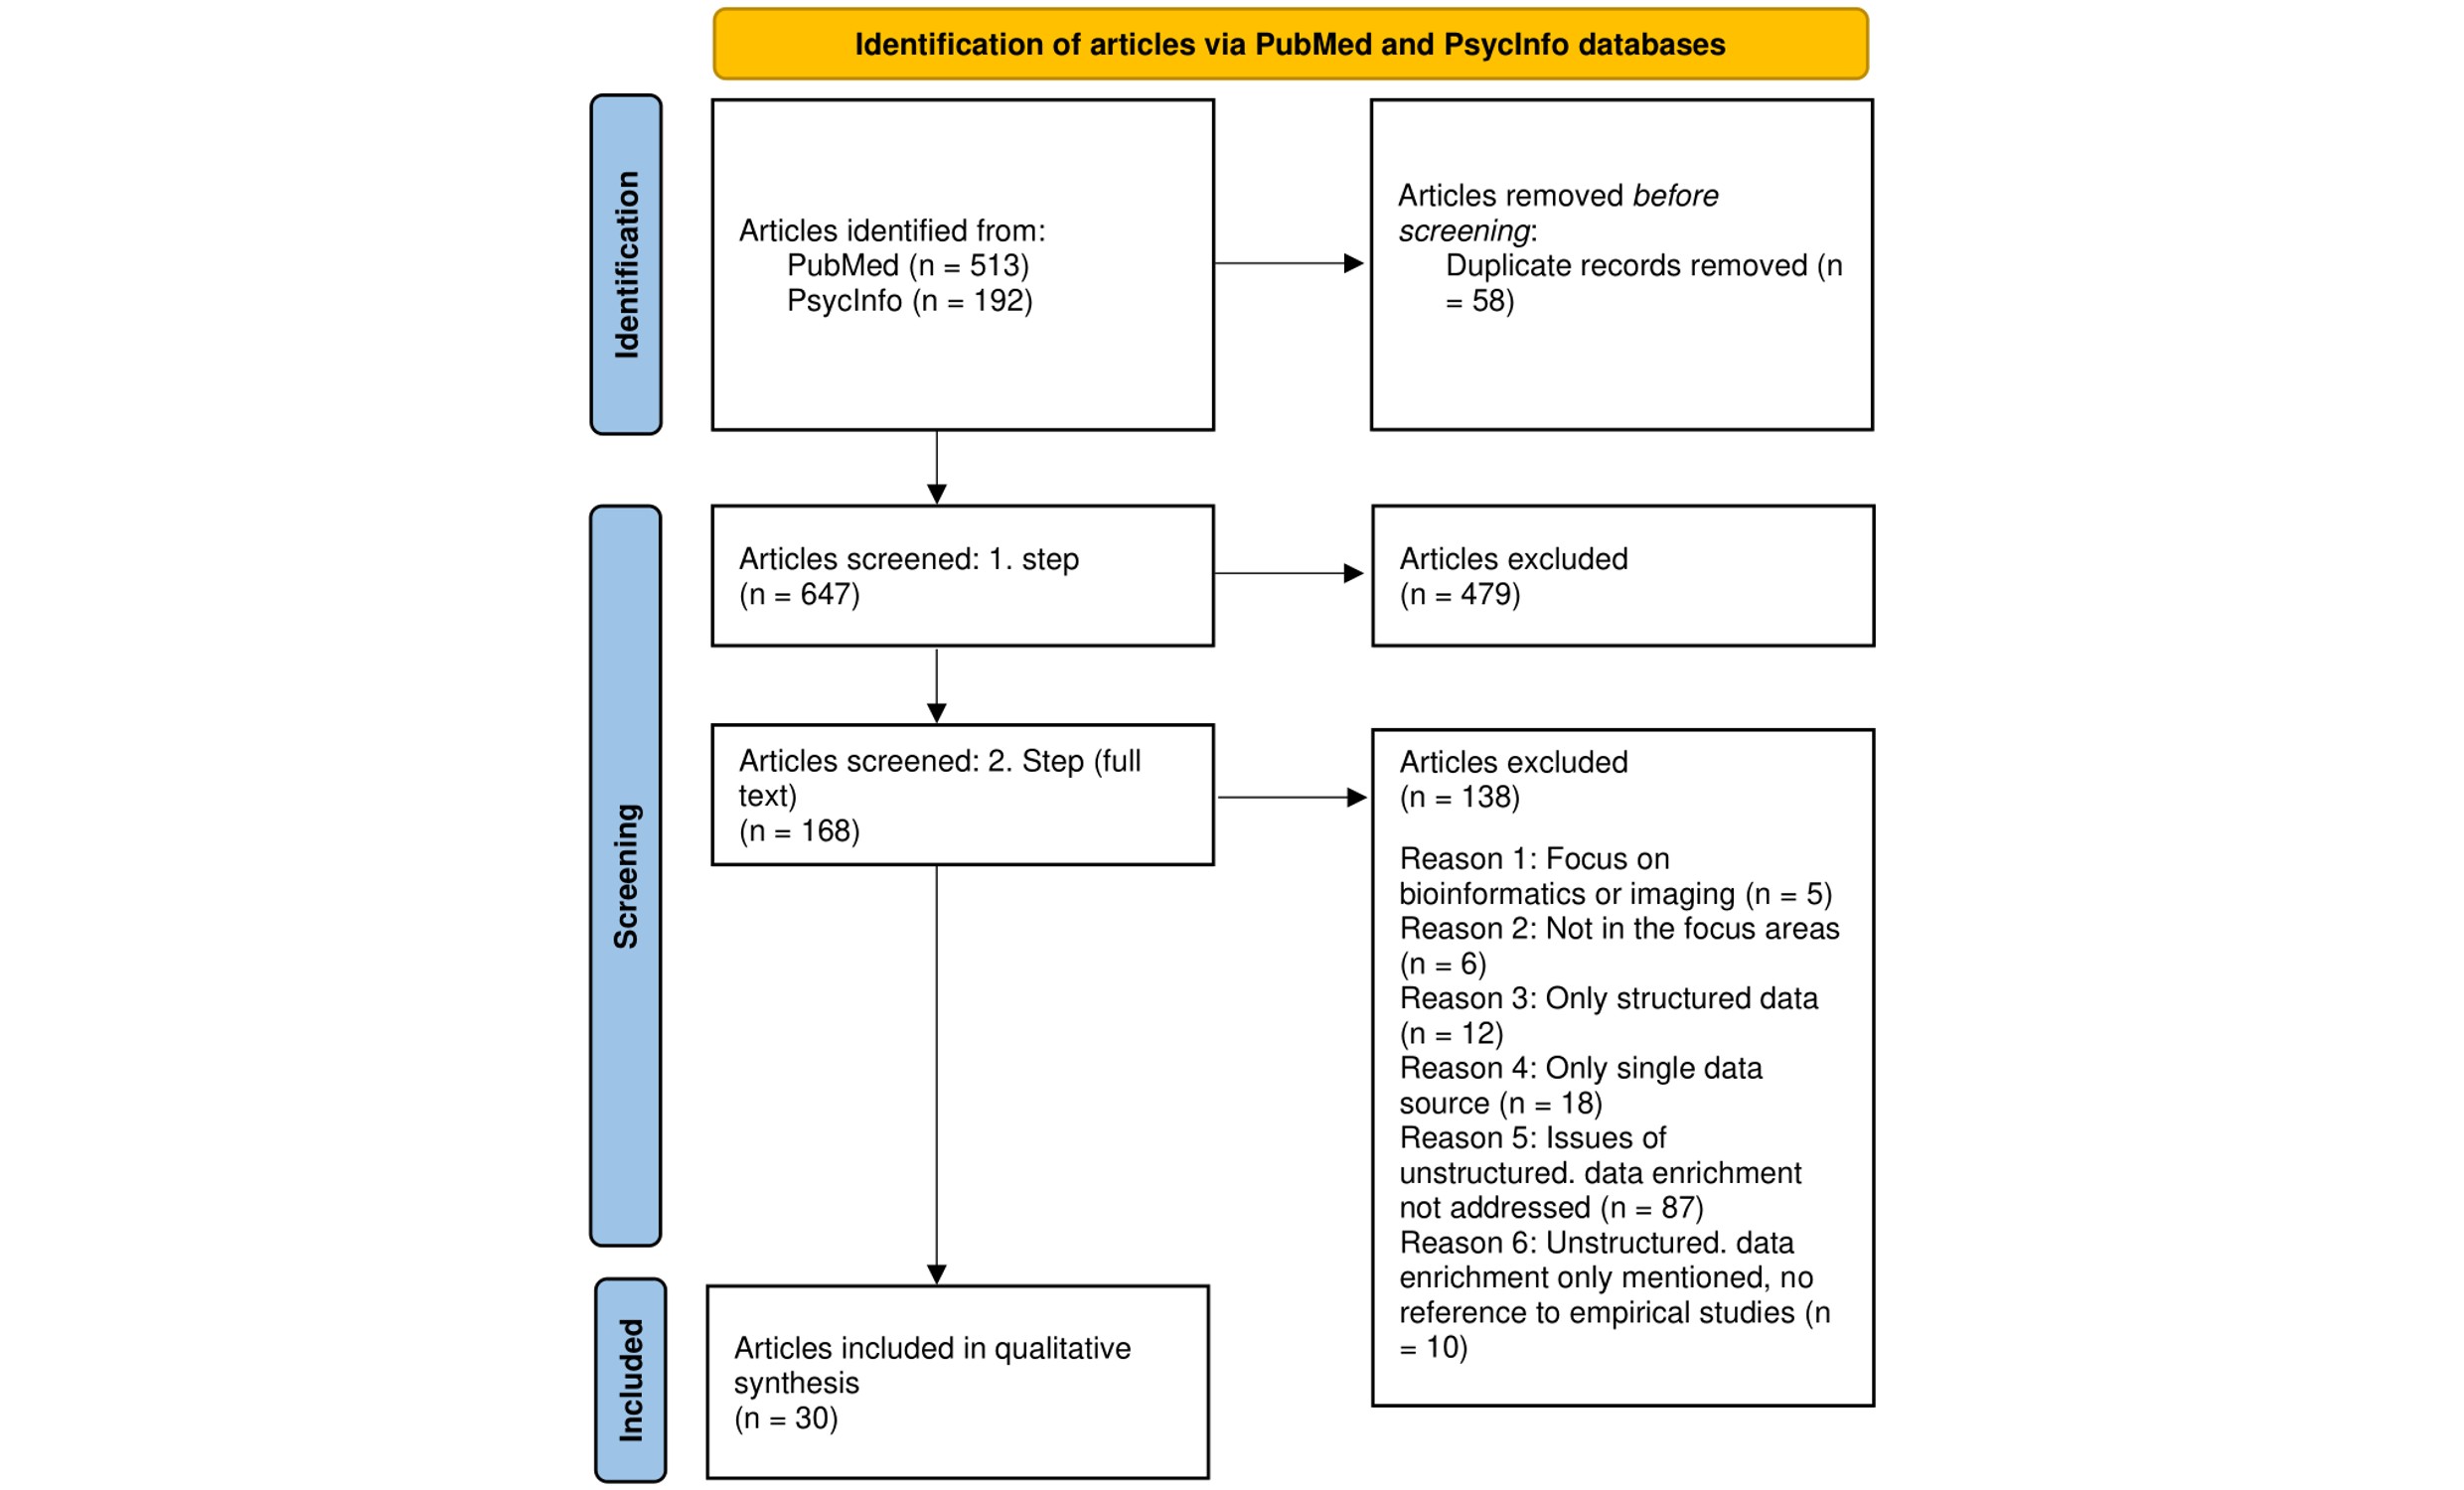 Challenges and best practices for digital unstructured data enrichment in health research: A systematic narrative review